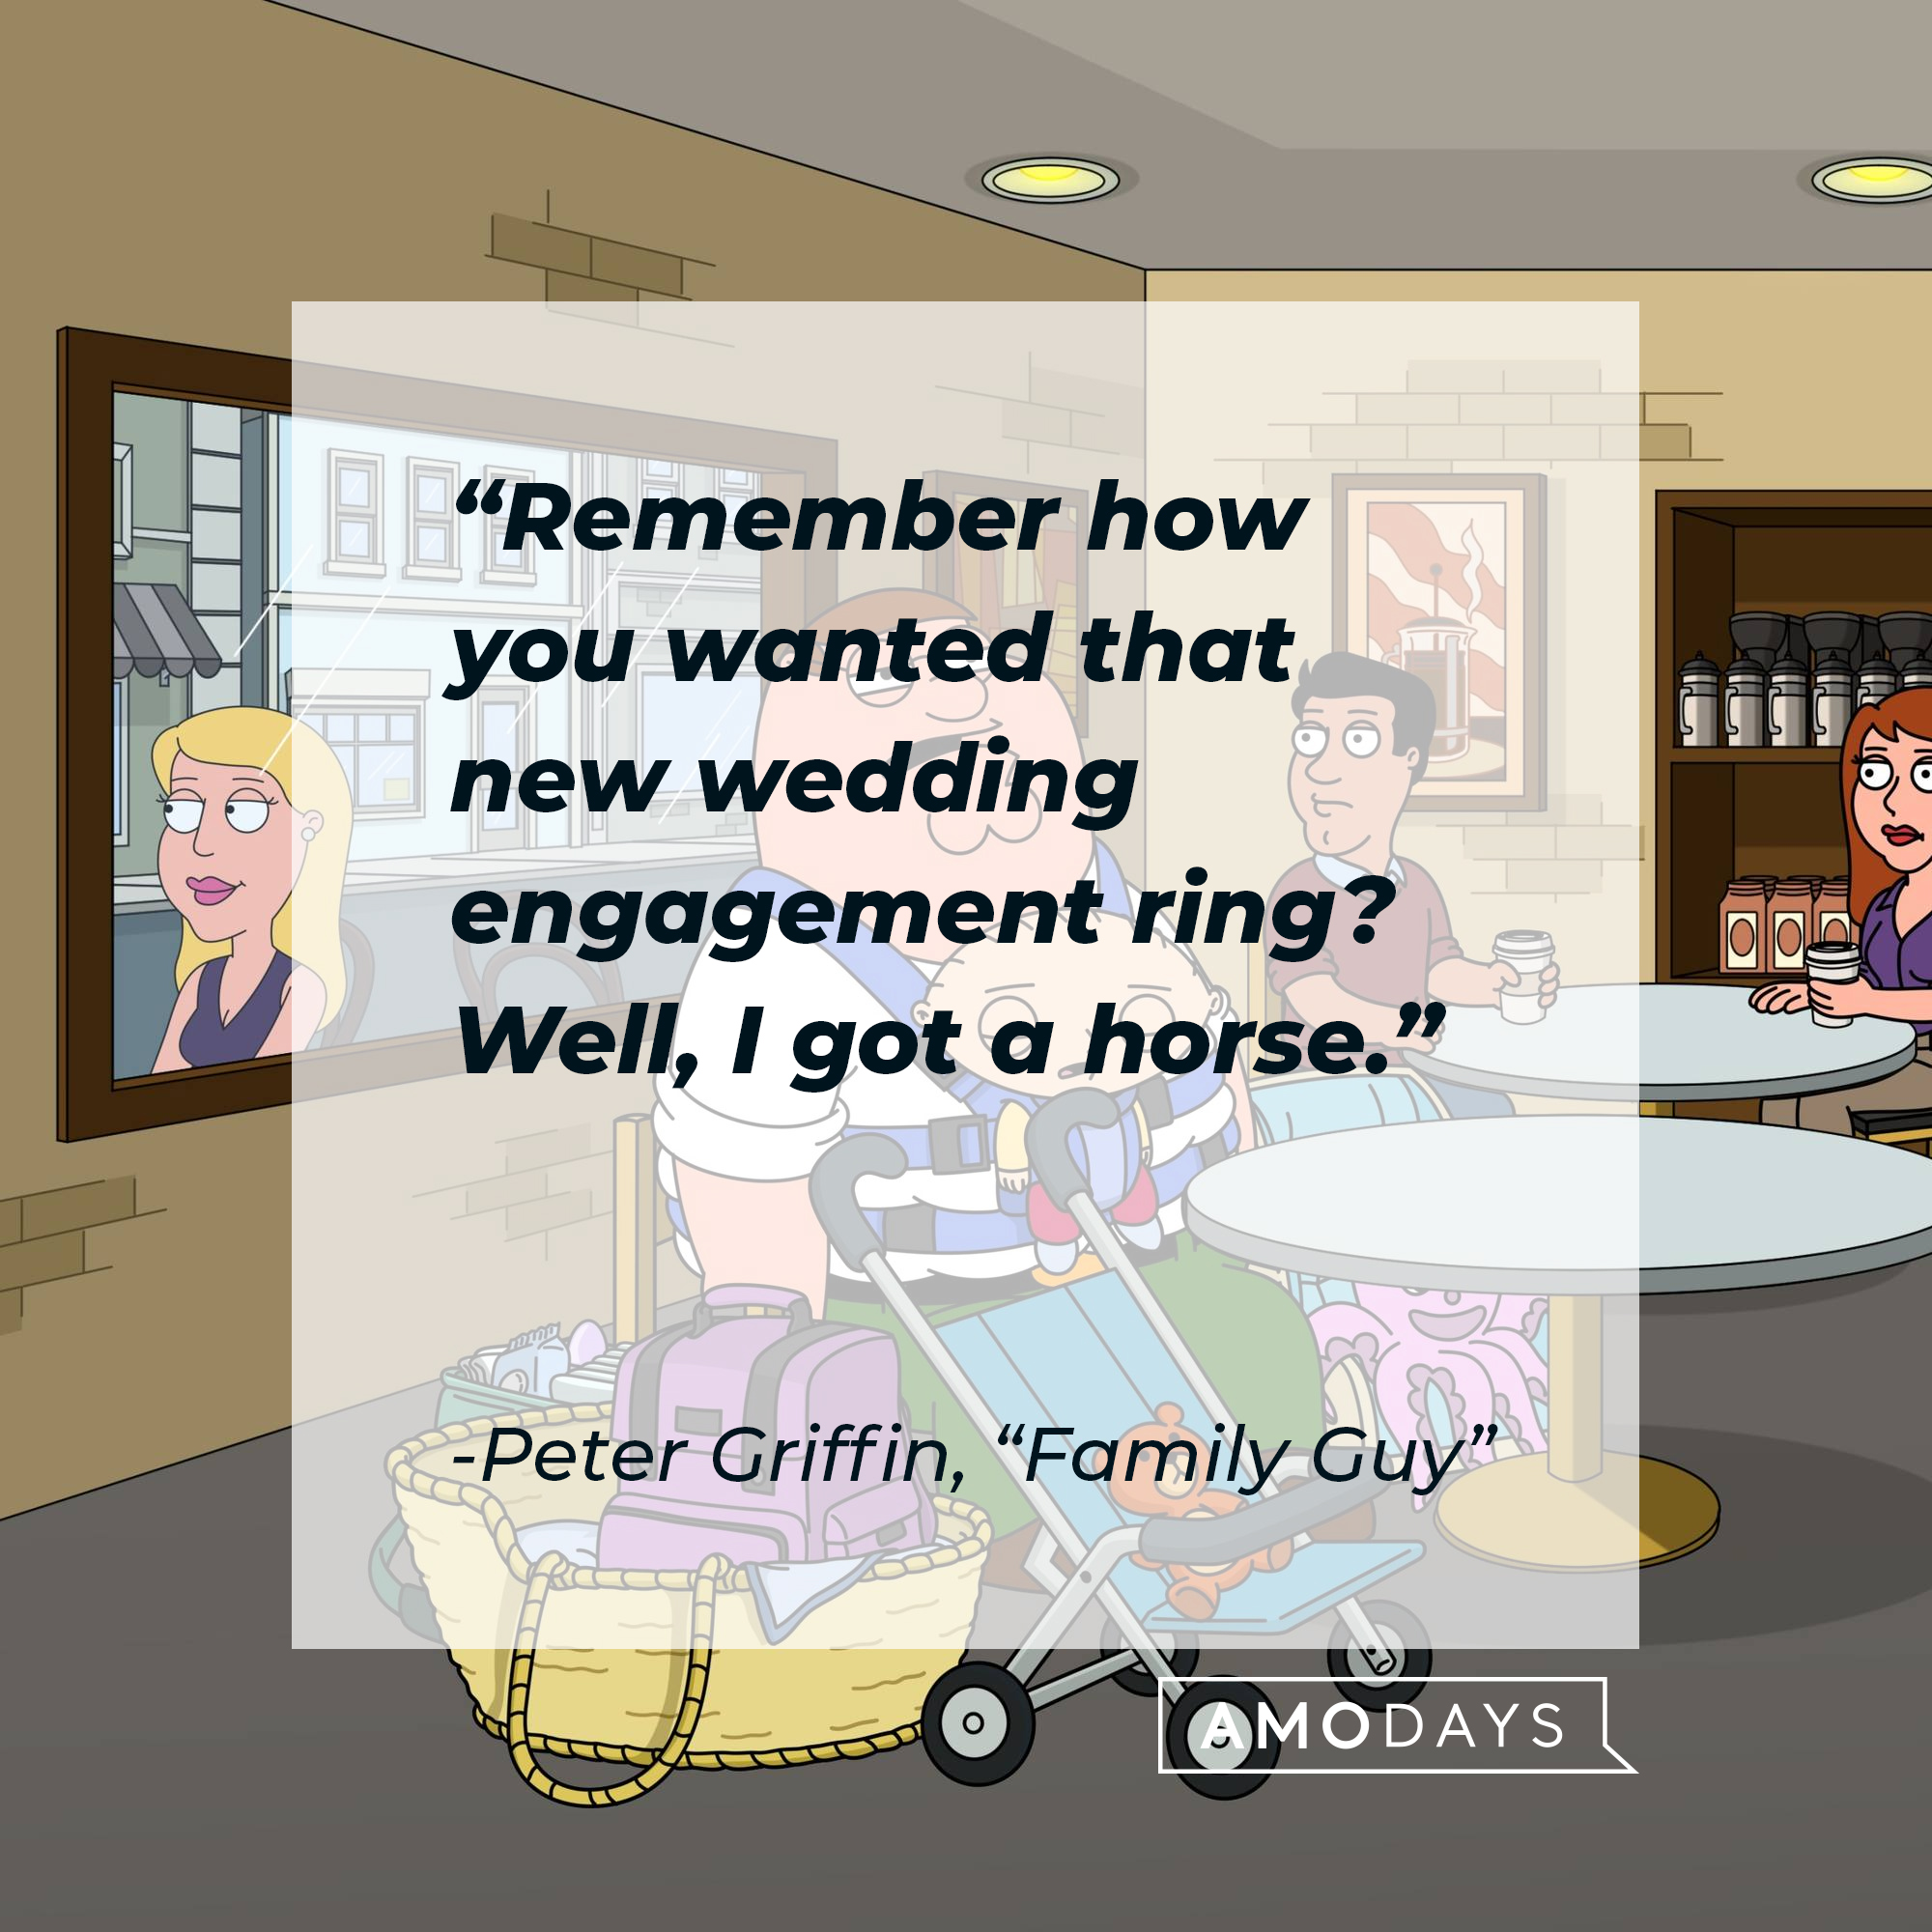 Peter Griffin's quote: "Remember how you wanted that new wedding engagement ring? Well, I got a horse." | Source: facebook.com/FamilyGuy